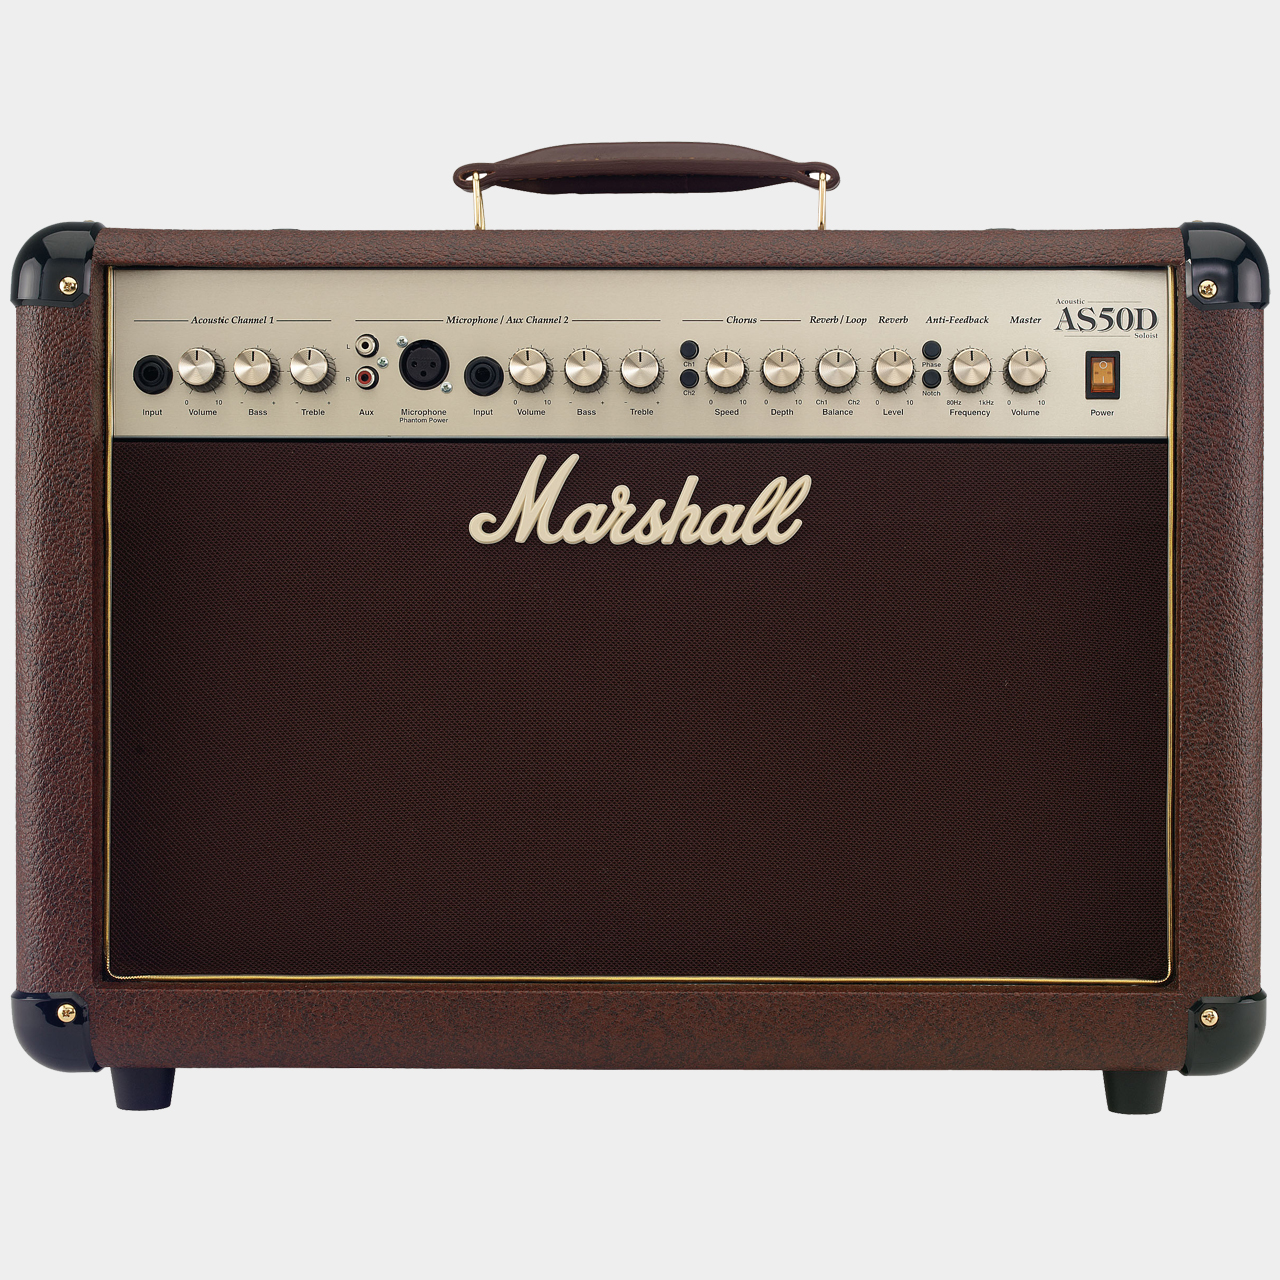 Marshall AS50D | MUSIC STORE professional